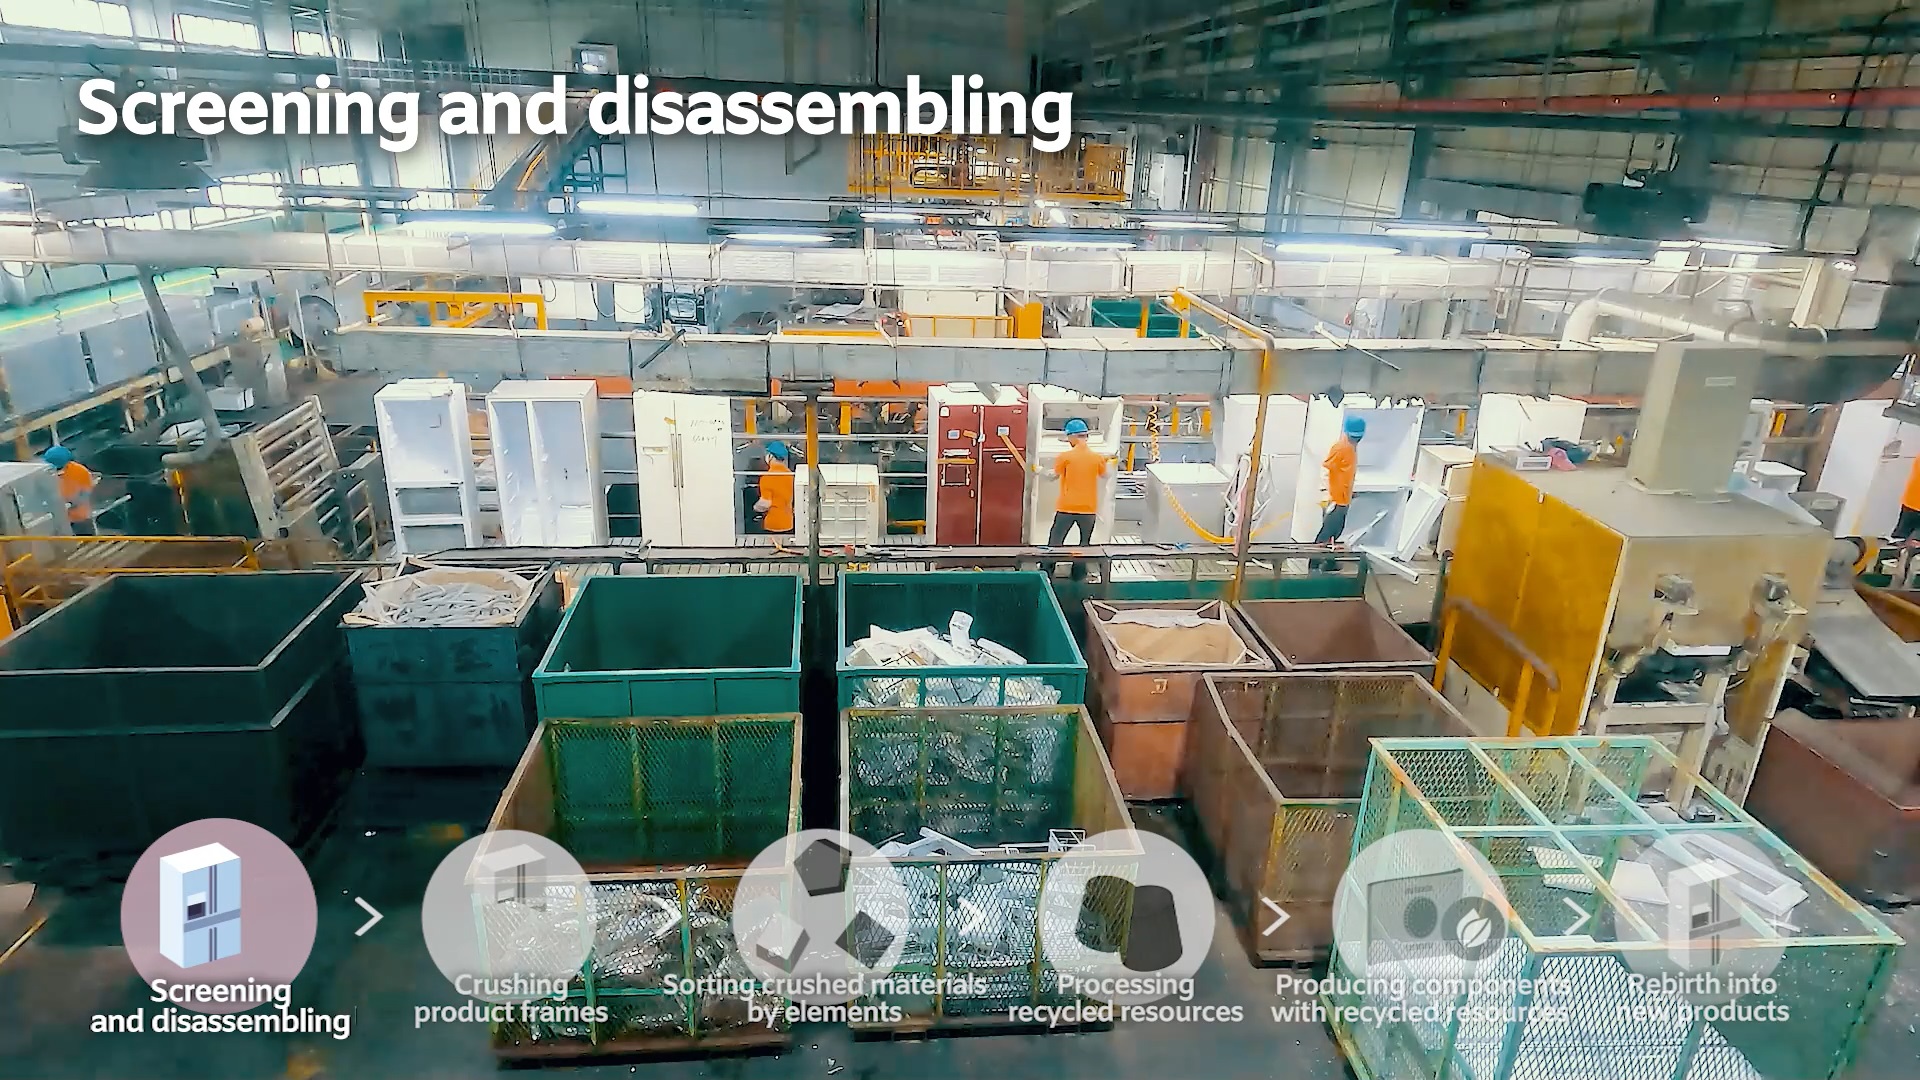 The screening and disassembling process of e-waste inside the LG Chilseo Recycling Center.